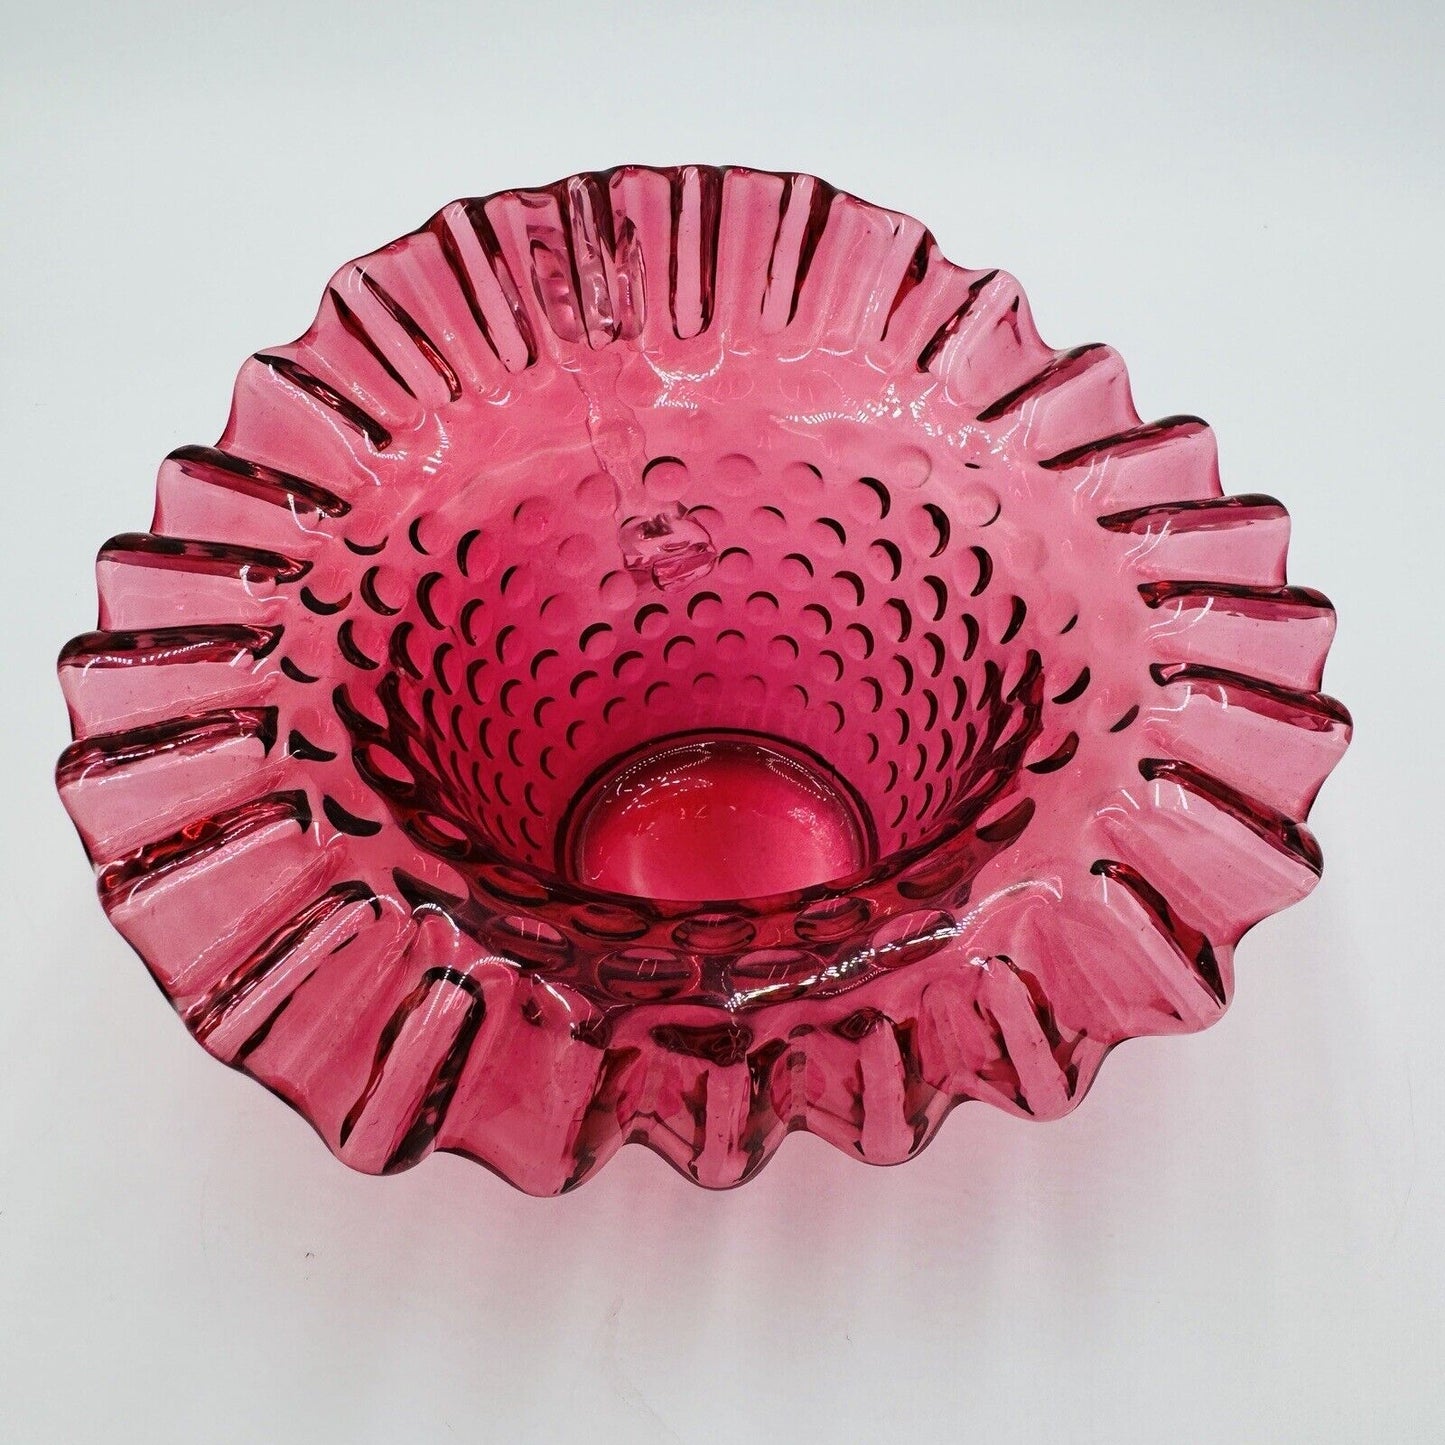 Fenton Art Glass Hobnail CRANBERRY RUFFLED Bowl With Handle Pitcher 4”h